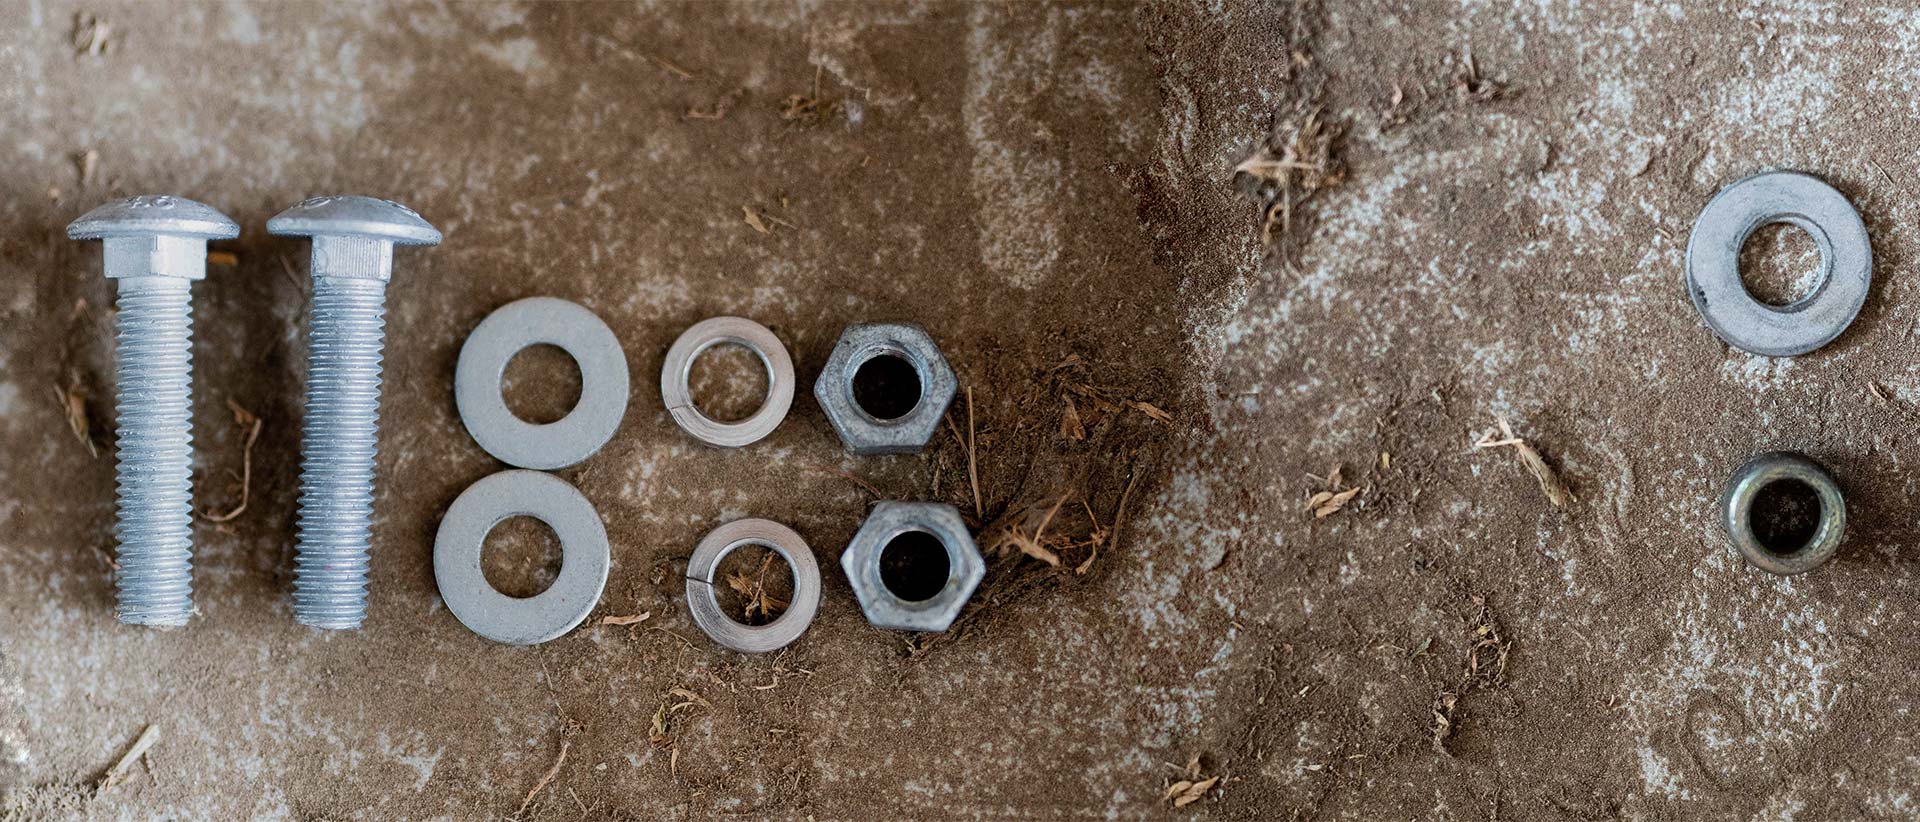 Nuts, bolts and washers on a dirty concrete floor